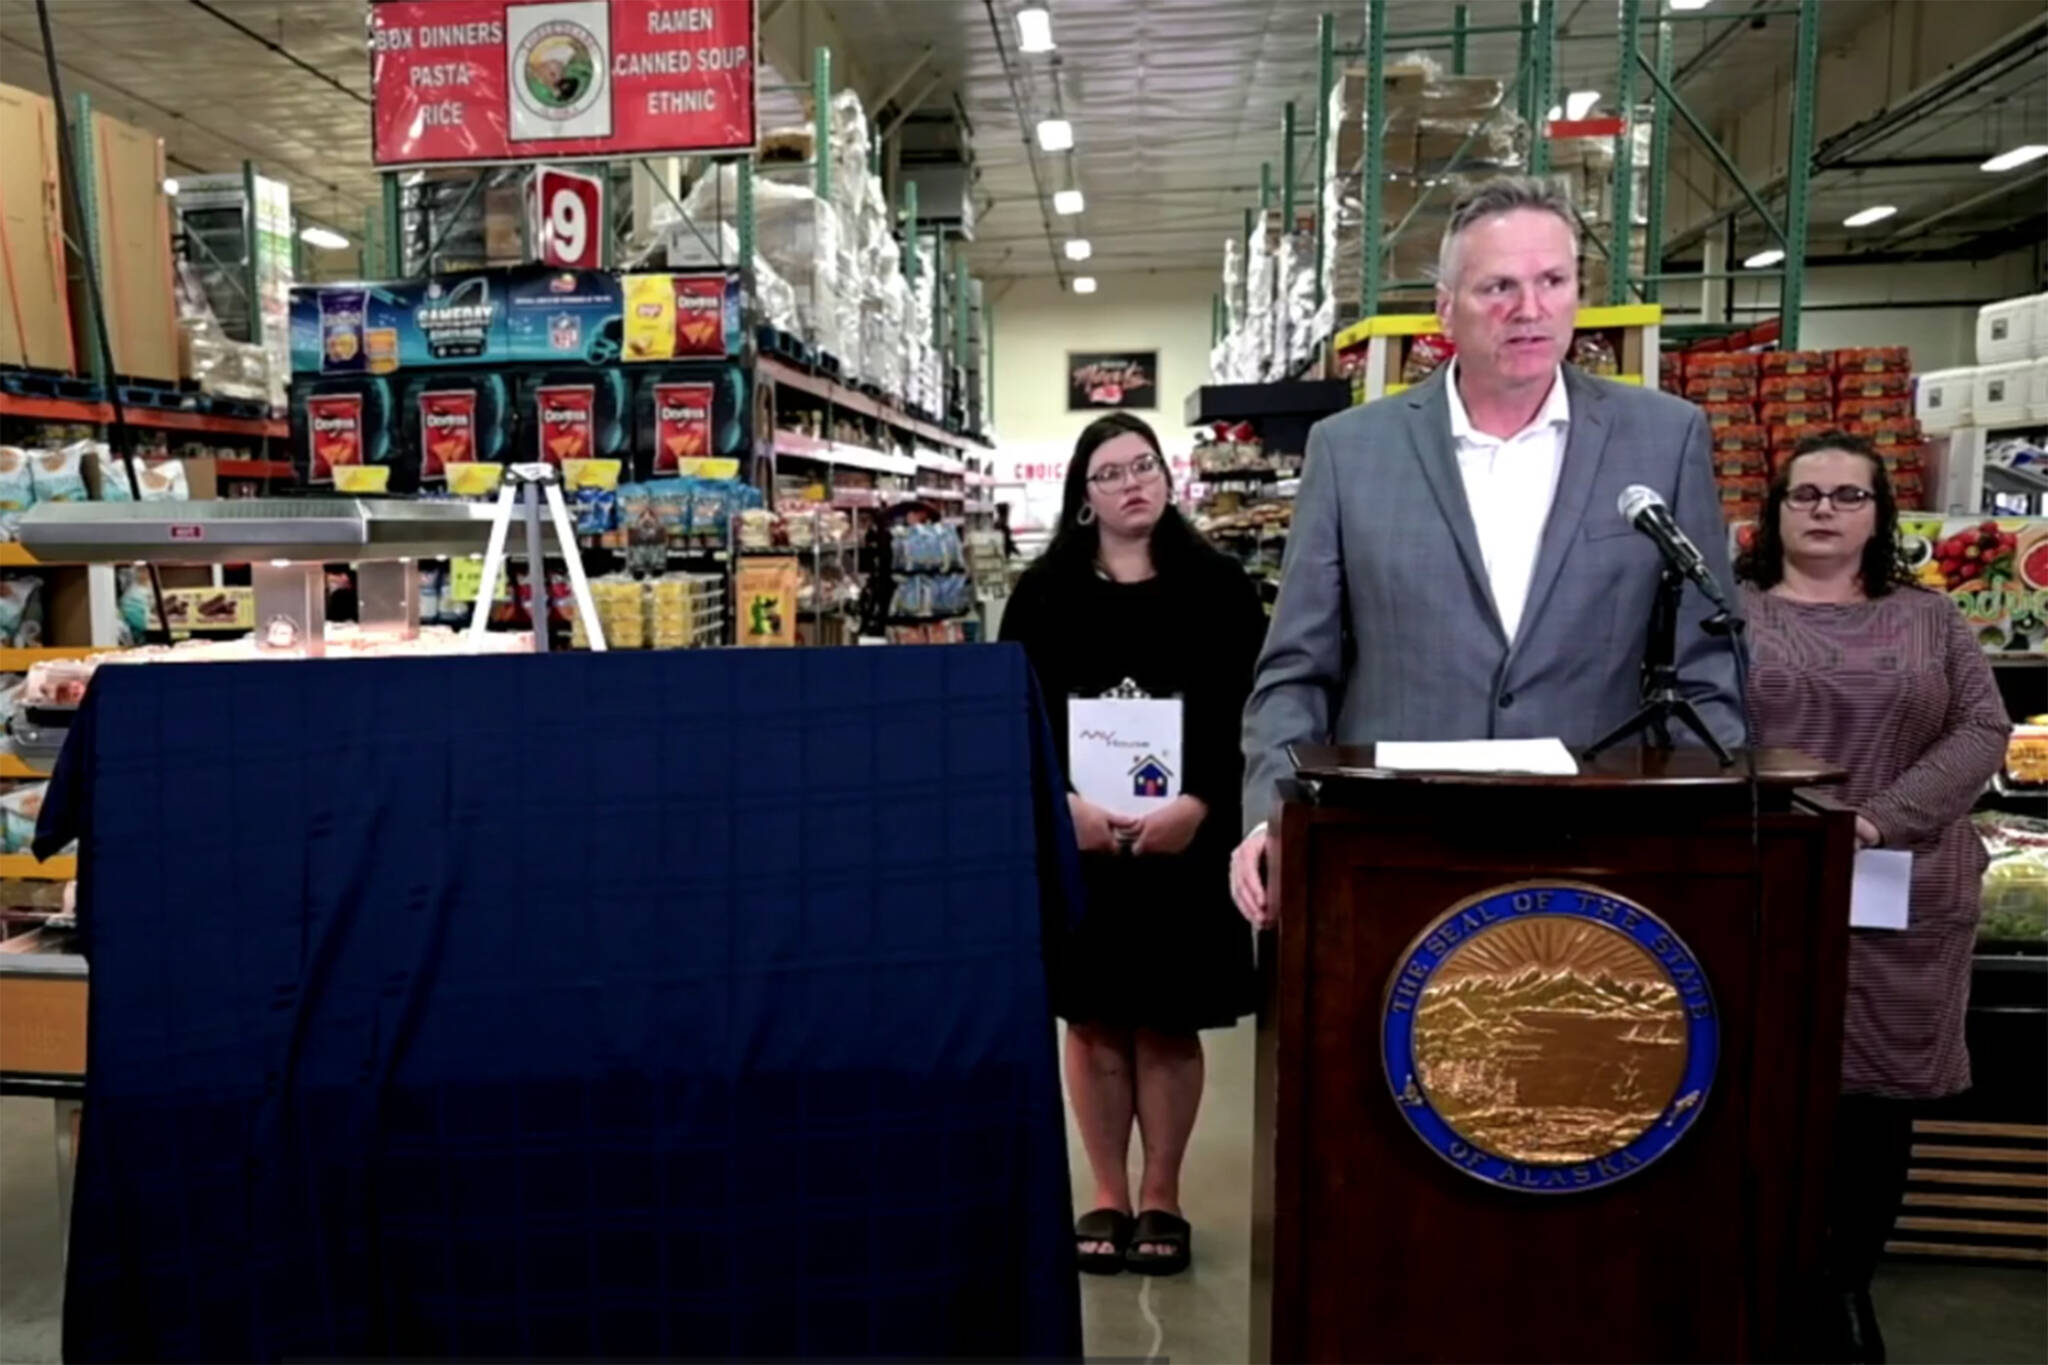 Gov. Mike Dunleavy stands at a lectern in a Three Bears Alaska store in Palmer, next to a giant, covered check containing this year’s Alaska Permanent Fund dividend amount on Thursday, Sept. 8, 2022. Behind him stand Alaska resident Miranda Wagoner, left, and Jessica Viera, executive director, Wasilla Chamber of Commerce, who gave speeches at the event. (Faceboook live screenshot)